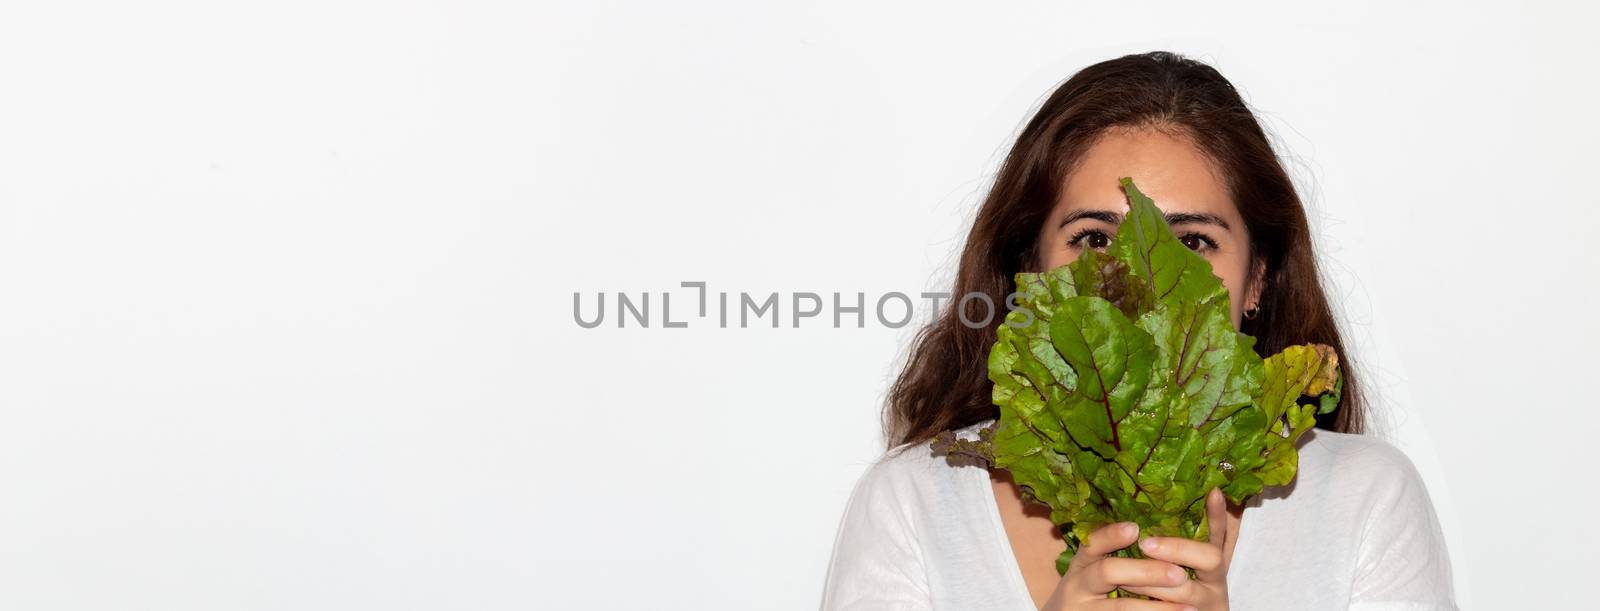 Real young man with a bunch of radishes covering his face. Isolated on a white background. by leo_de_la_garza